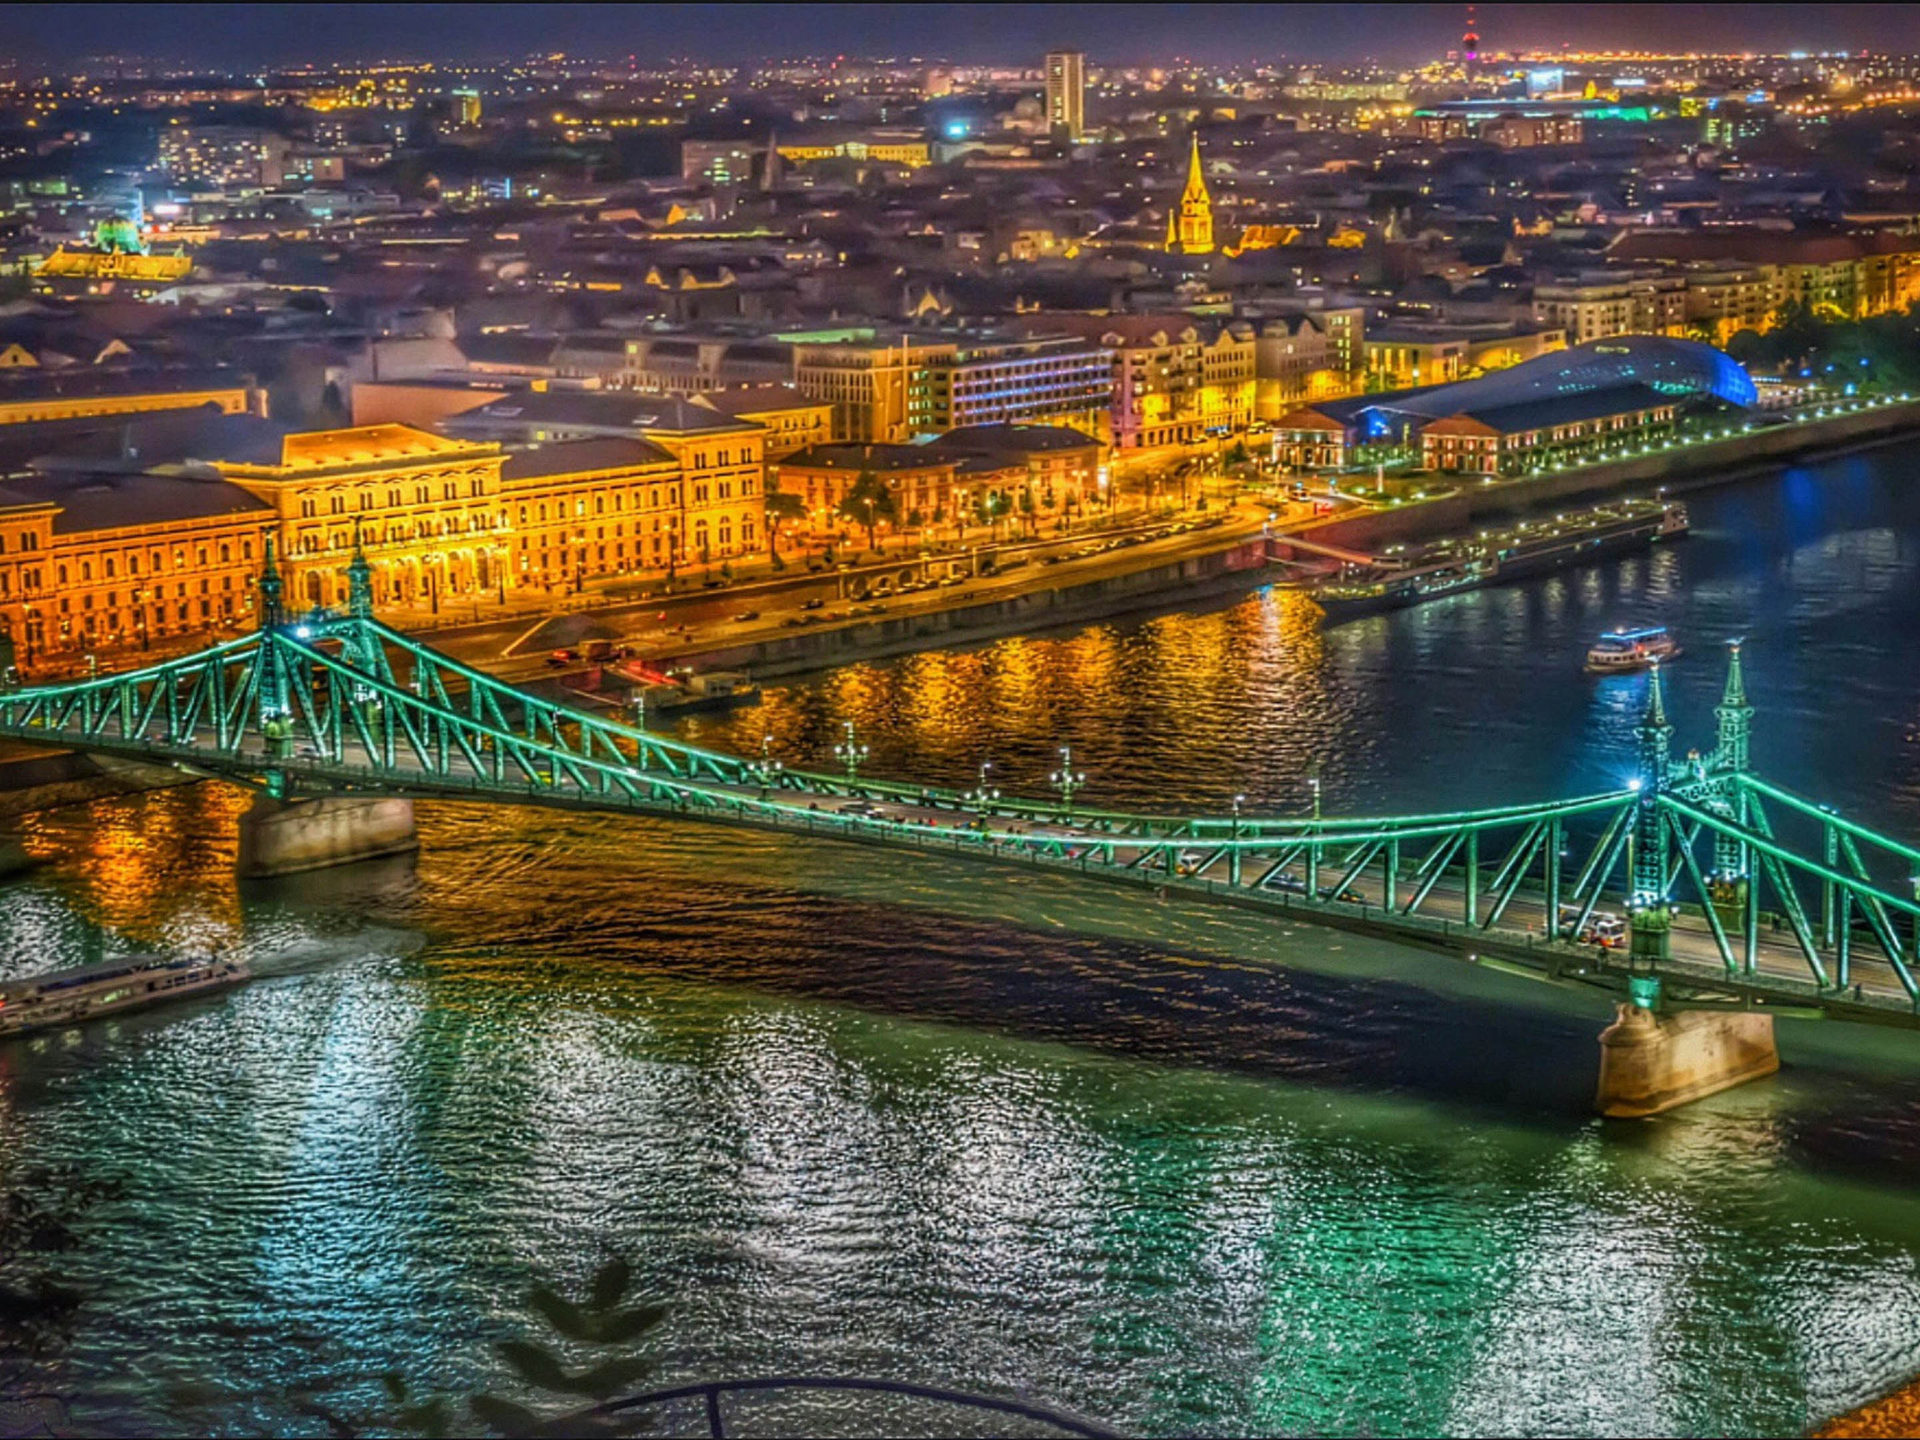 Budapest Hungary Beautiful Panorama Chain Bridge River Danube From Castle Hill Desktop HD Wallpaper For Pc Tablet And Mobile 3840x2160, Wallpaper13.com